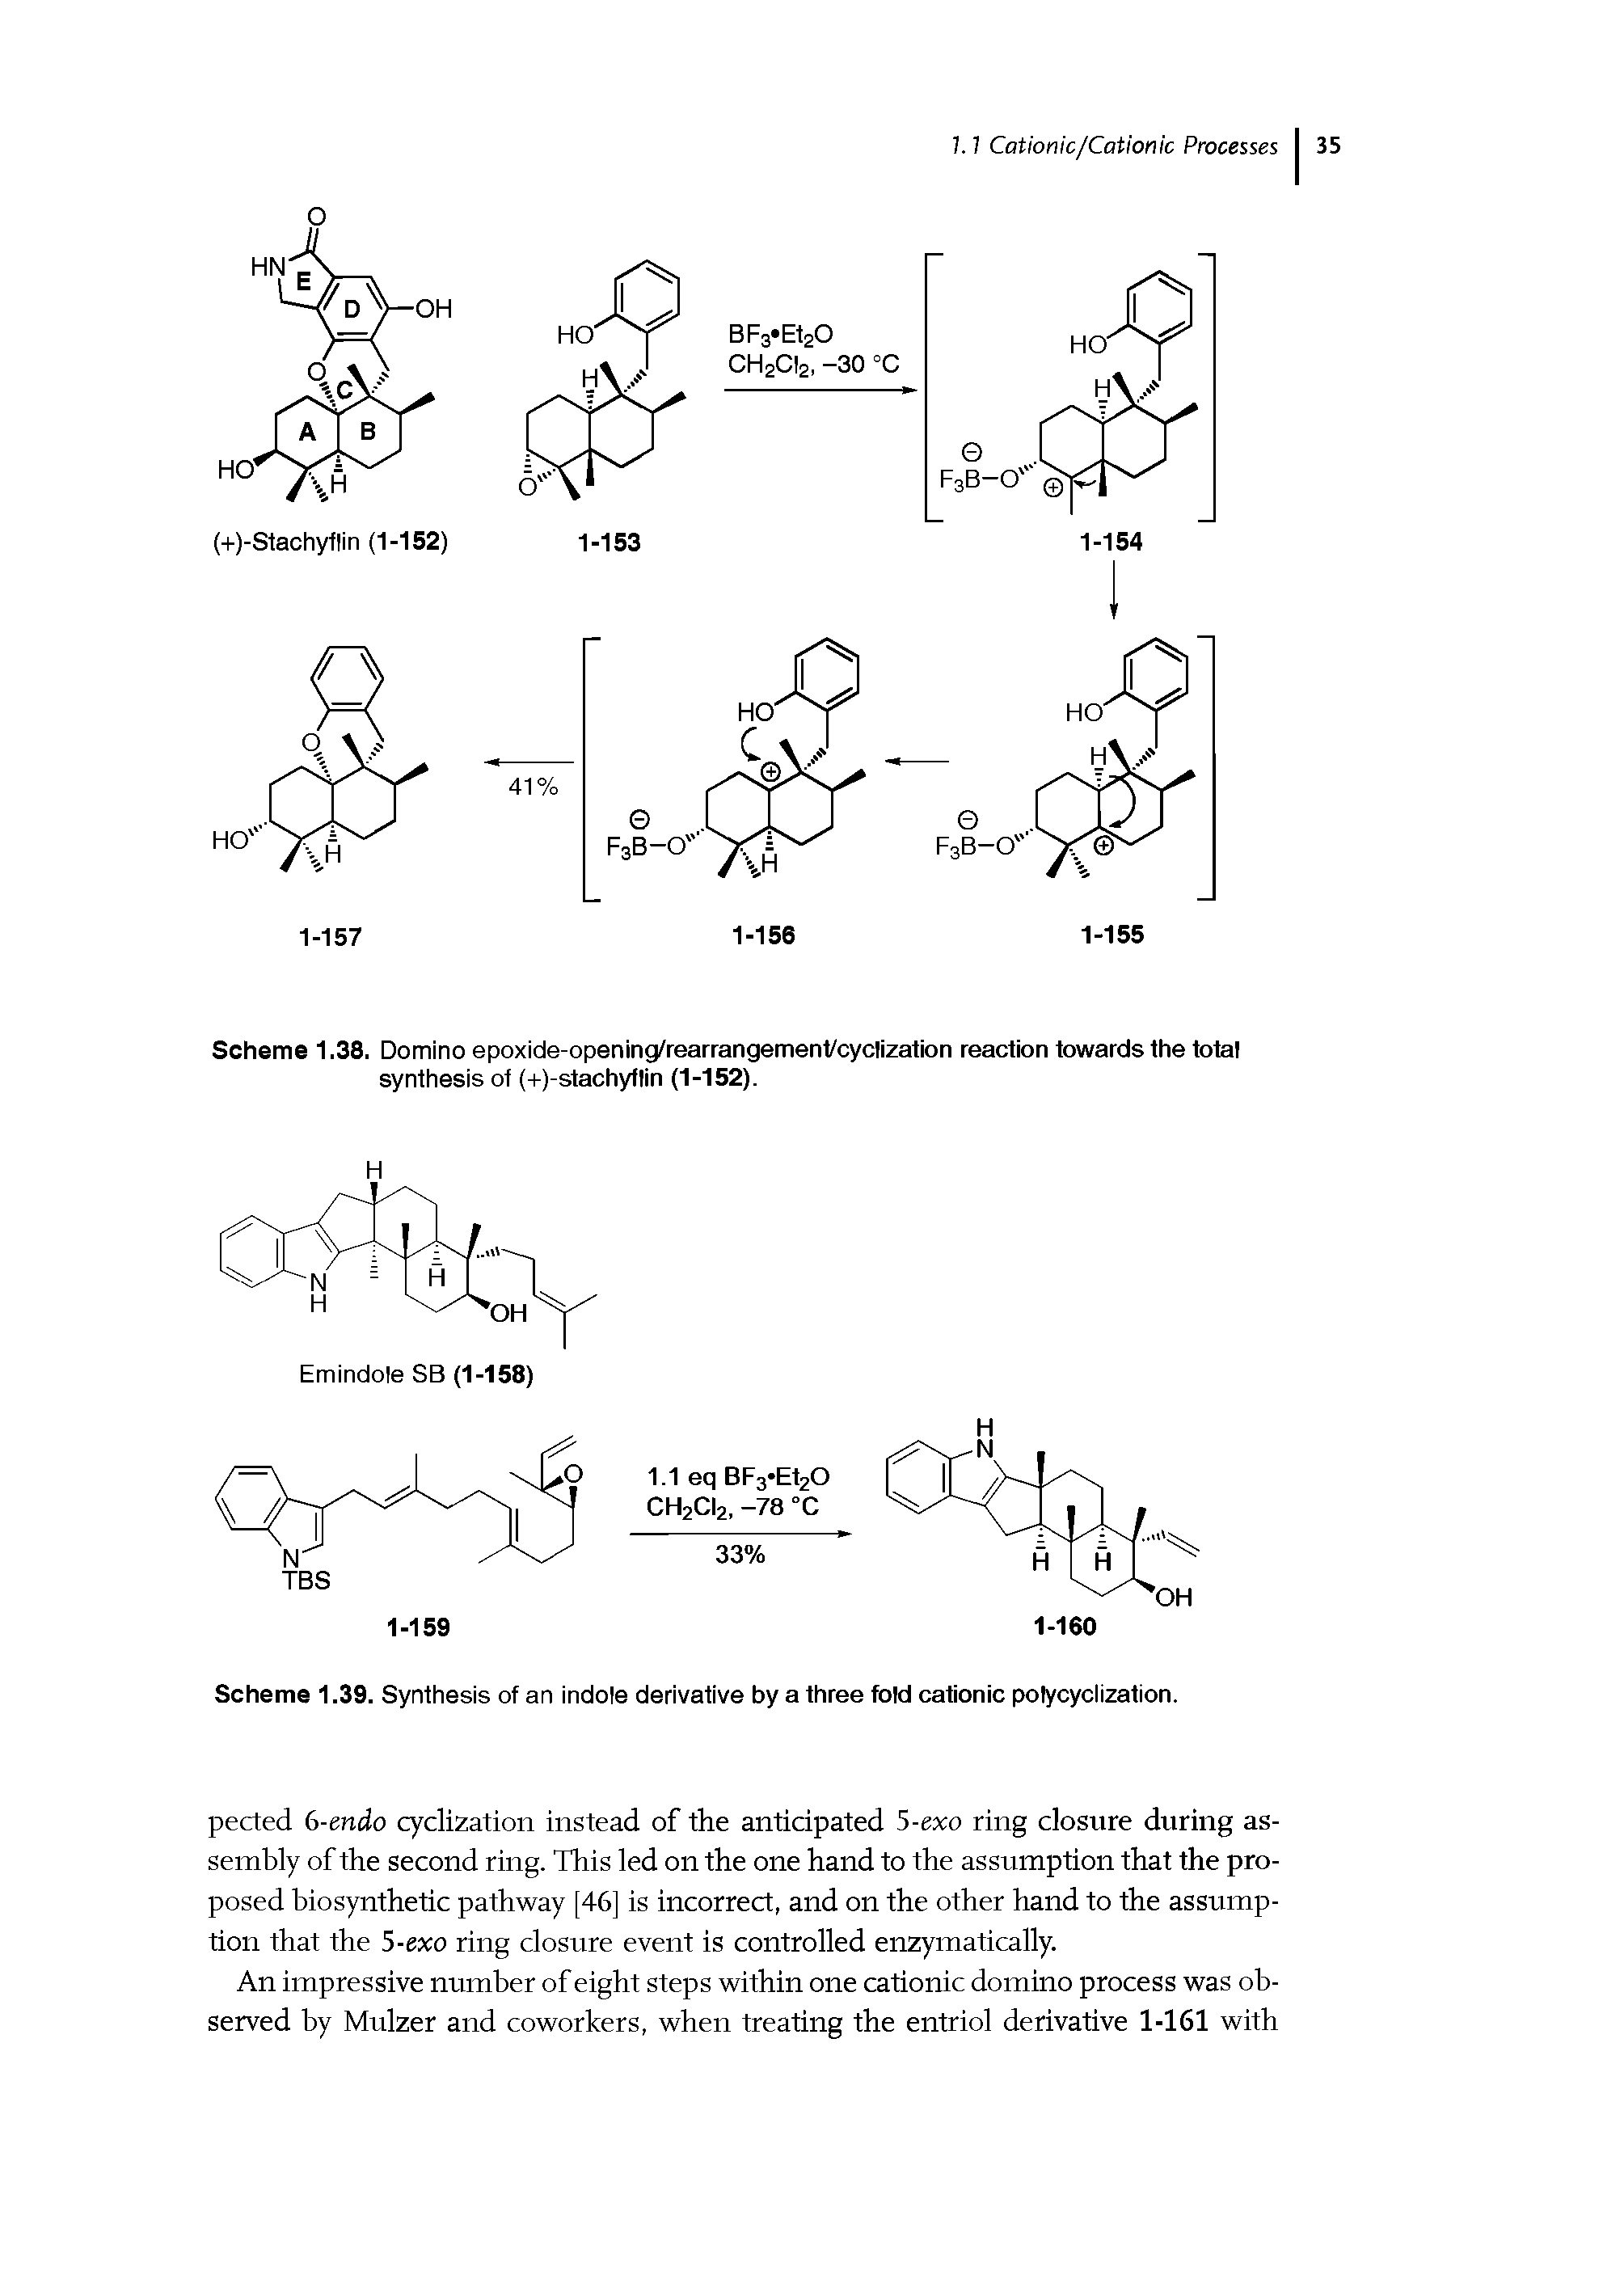 Scheme 1.38. Domino epoxide-opening/rearrangement/cydization reaction towards the total synthesis of (+)-stachyflin (1-152).